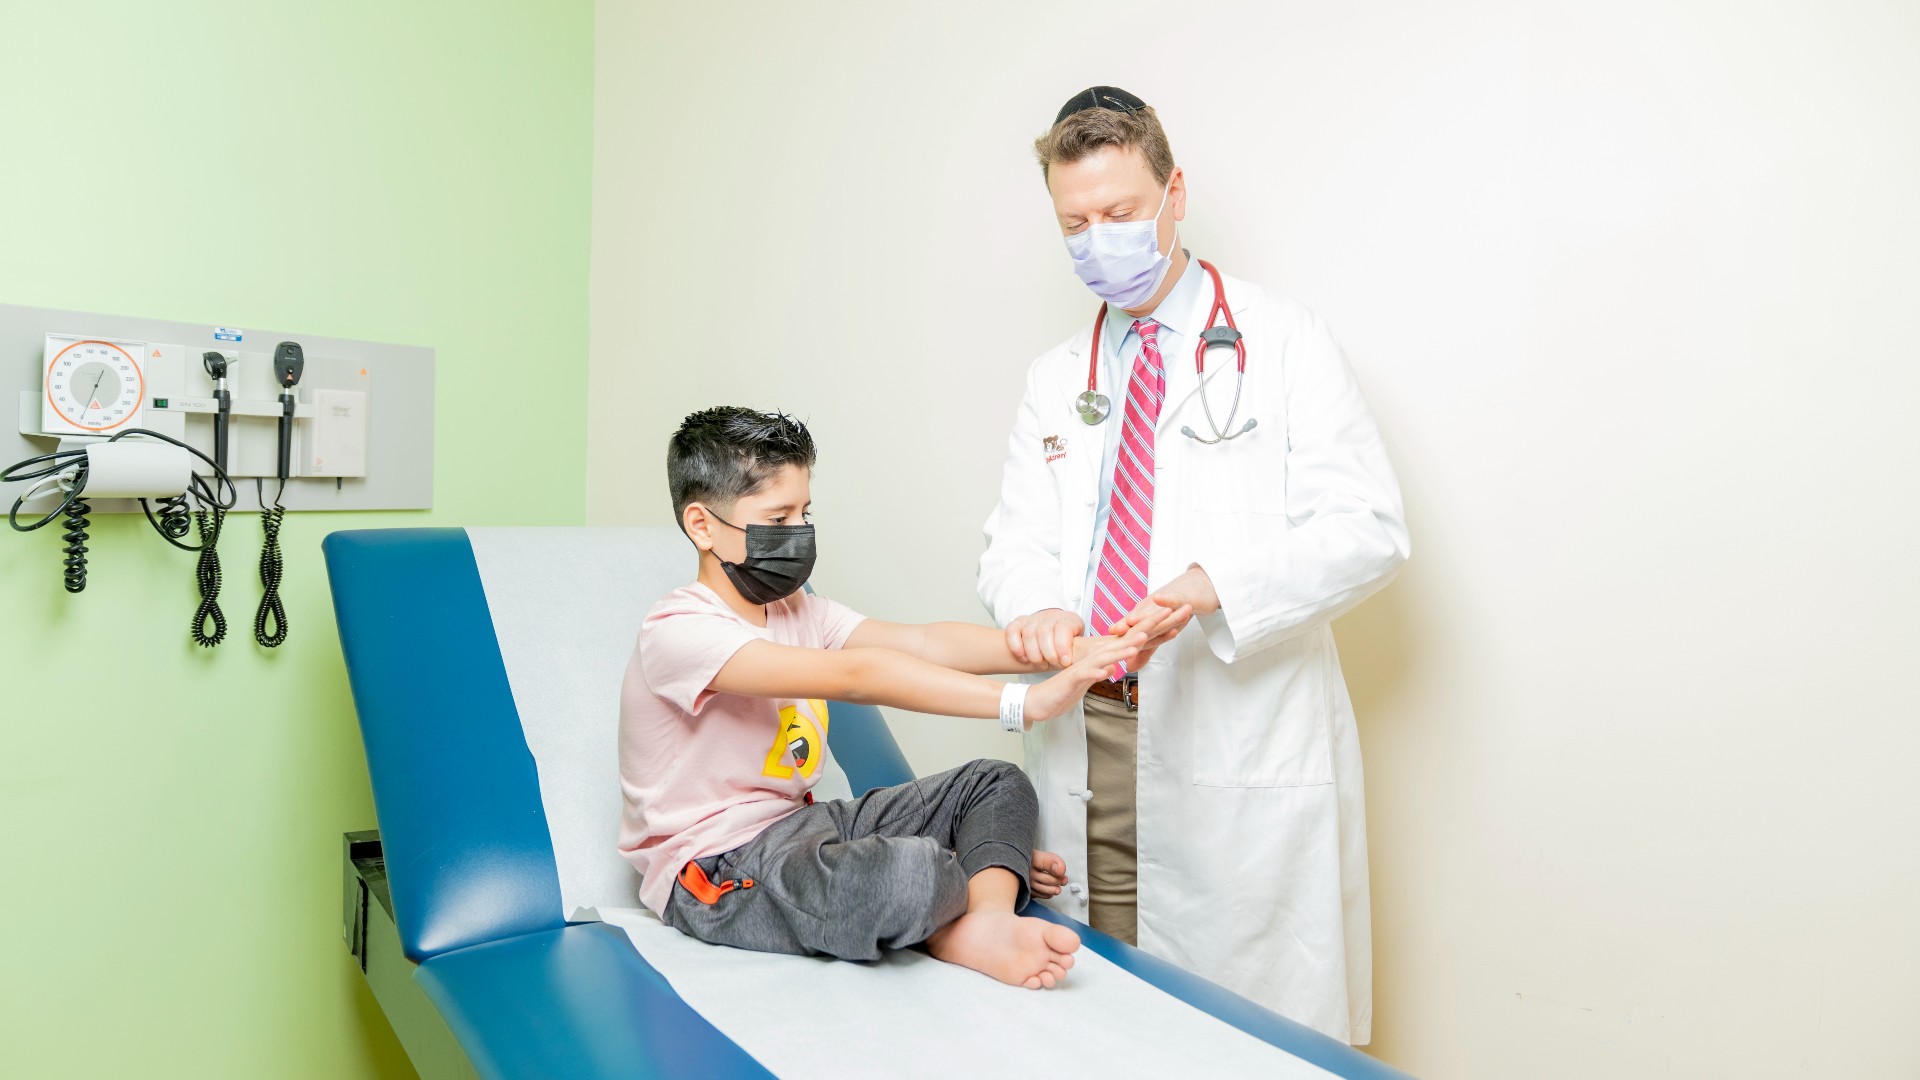 Provider performing a strength exam on a young boy